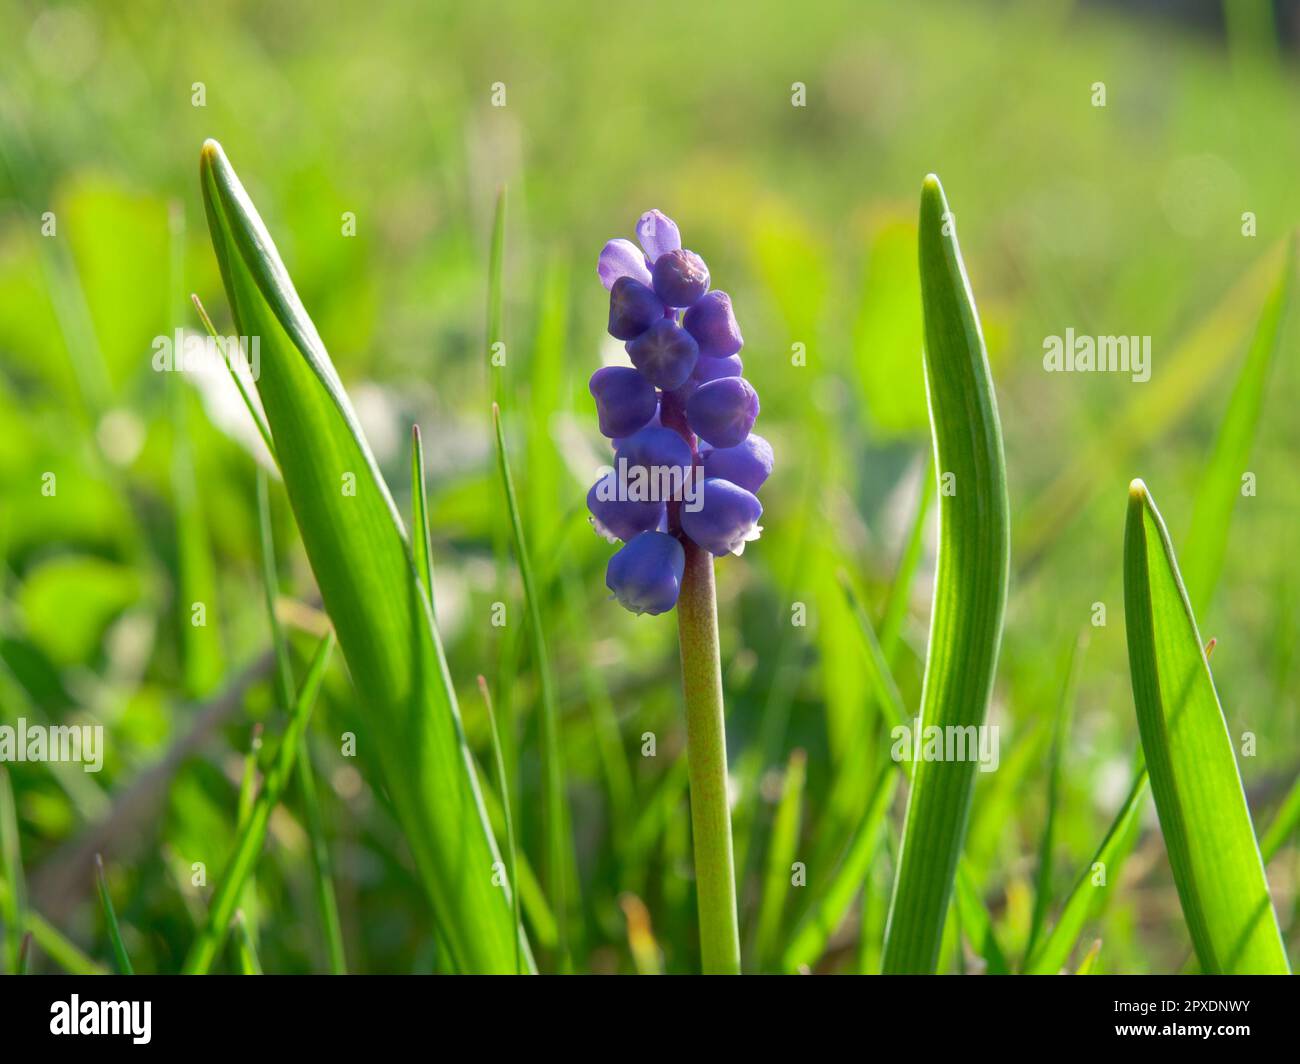 A grape hyacinth (Muscan) in the grass Stock Photo